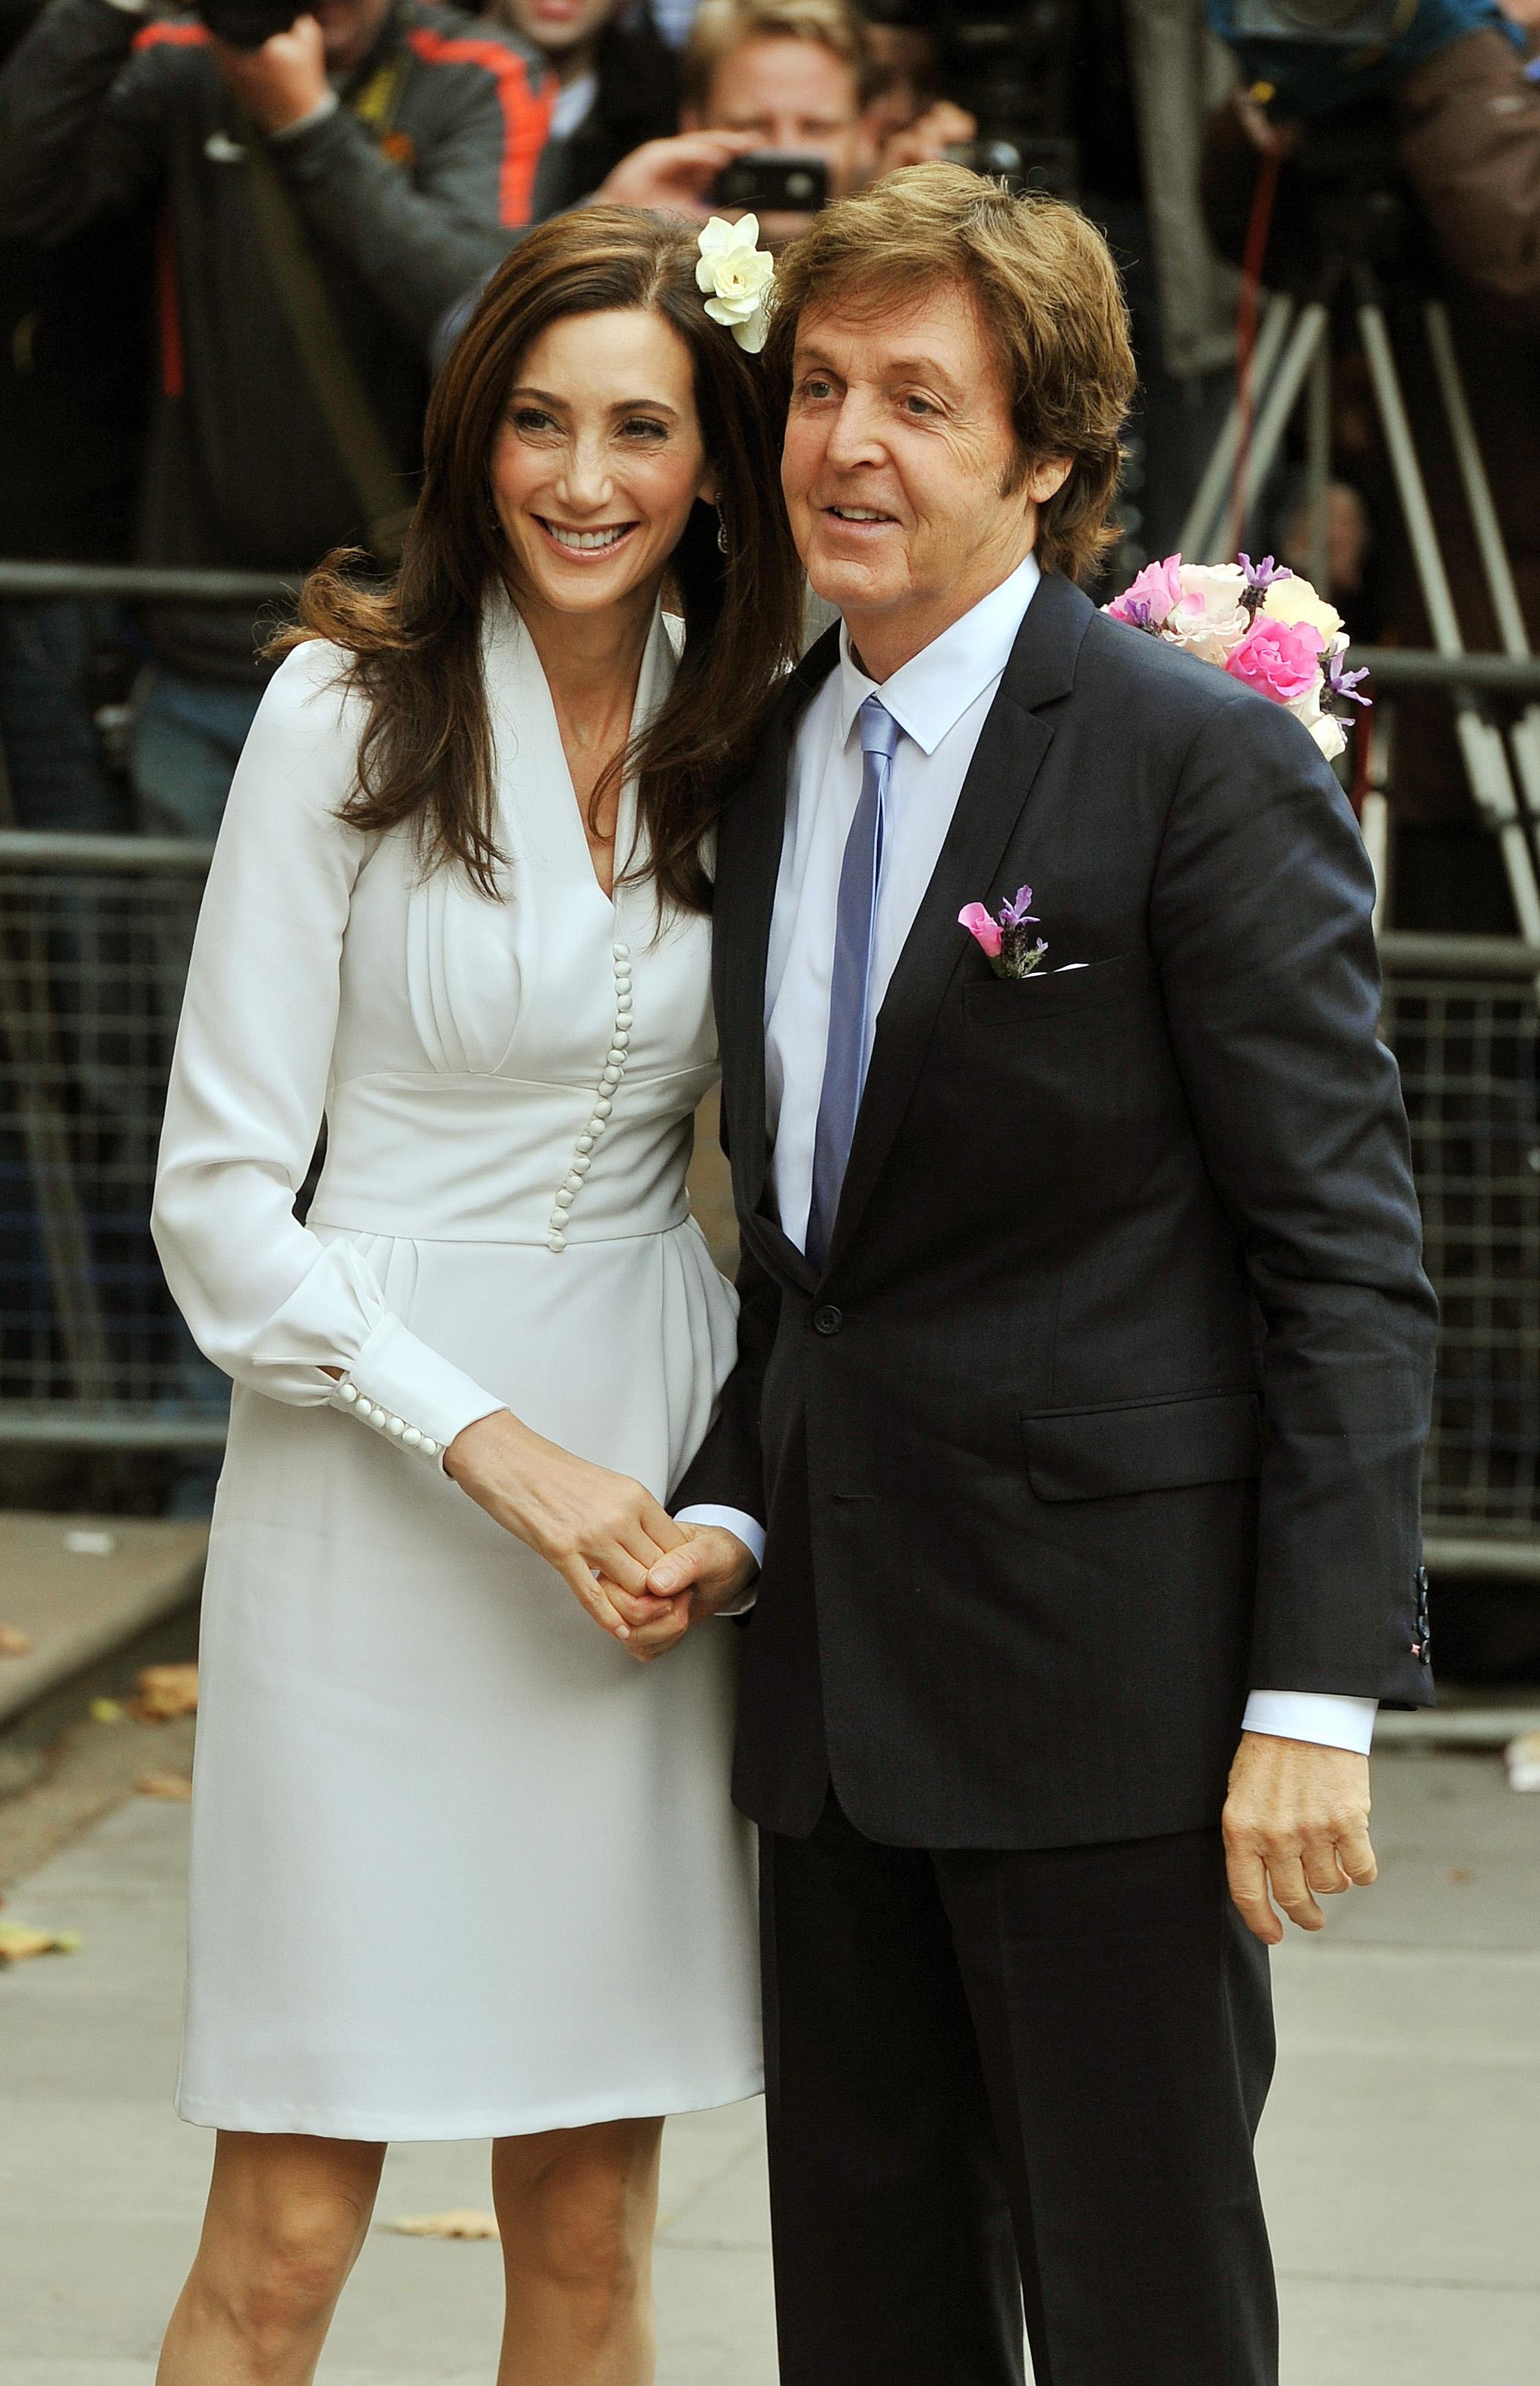 Nancy Shevell with Sir Paul McCartney arrive at Westminster Registry Office in north London for their wedding. | Source: Getty Images